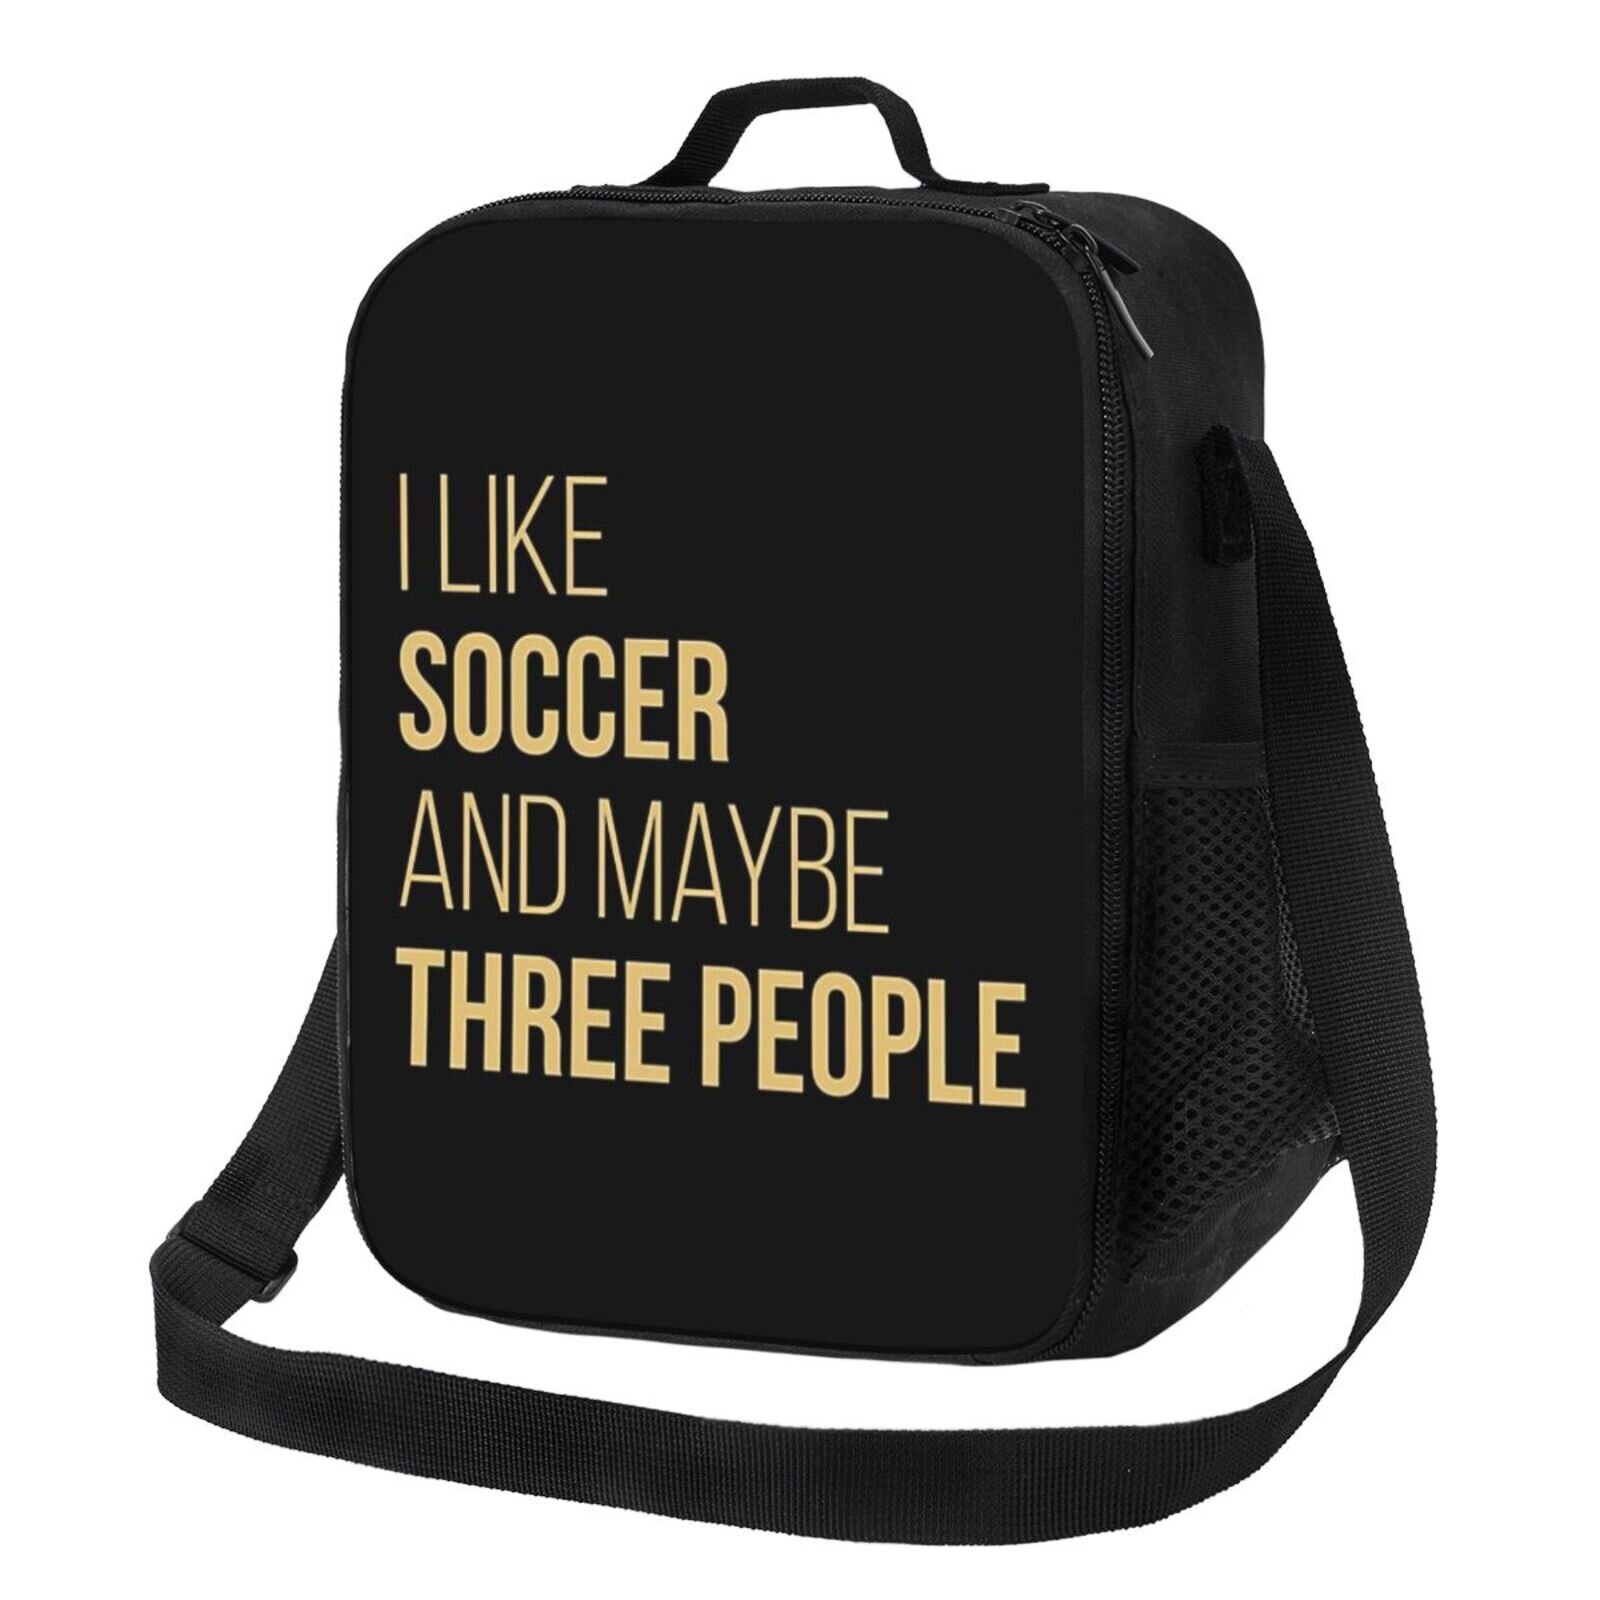 Lunch Bag Soccer Funny Quote Tote Insulated Kids Cooler School Travel